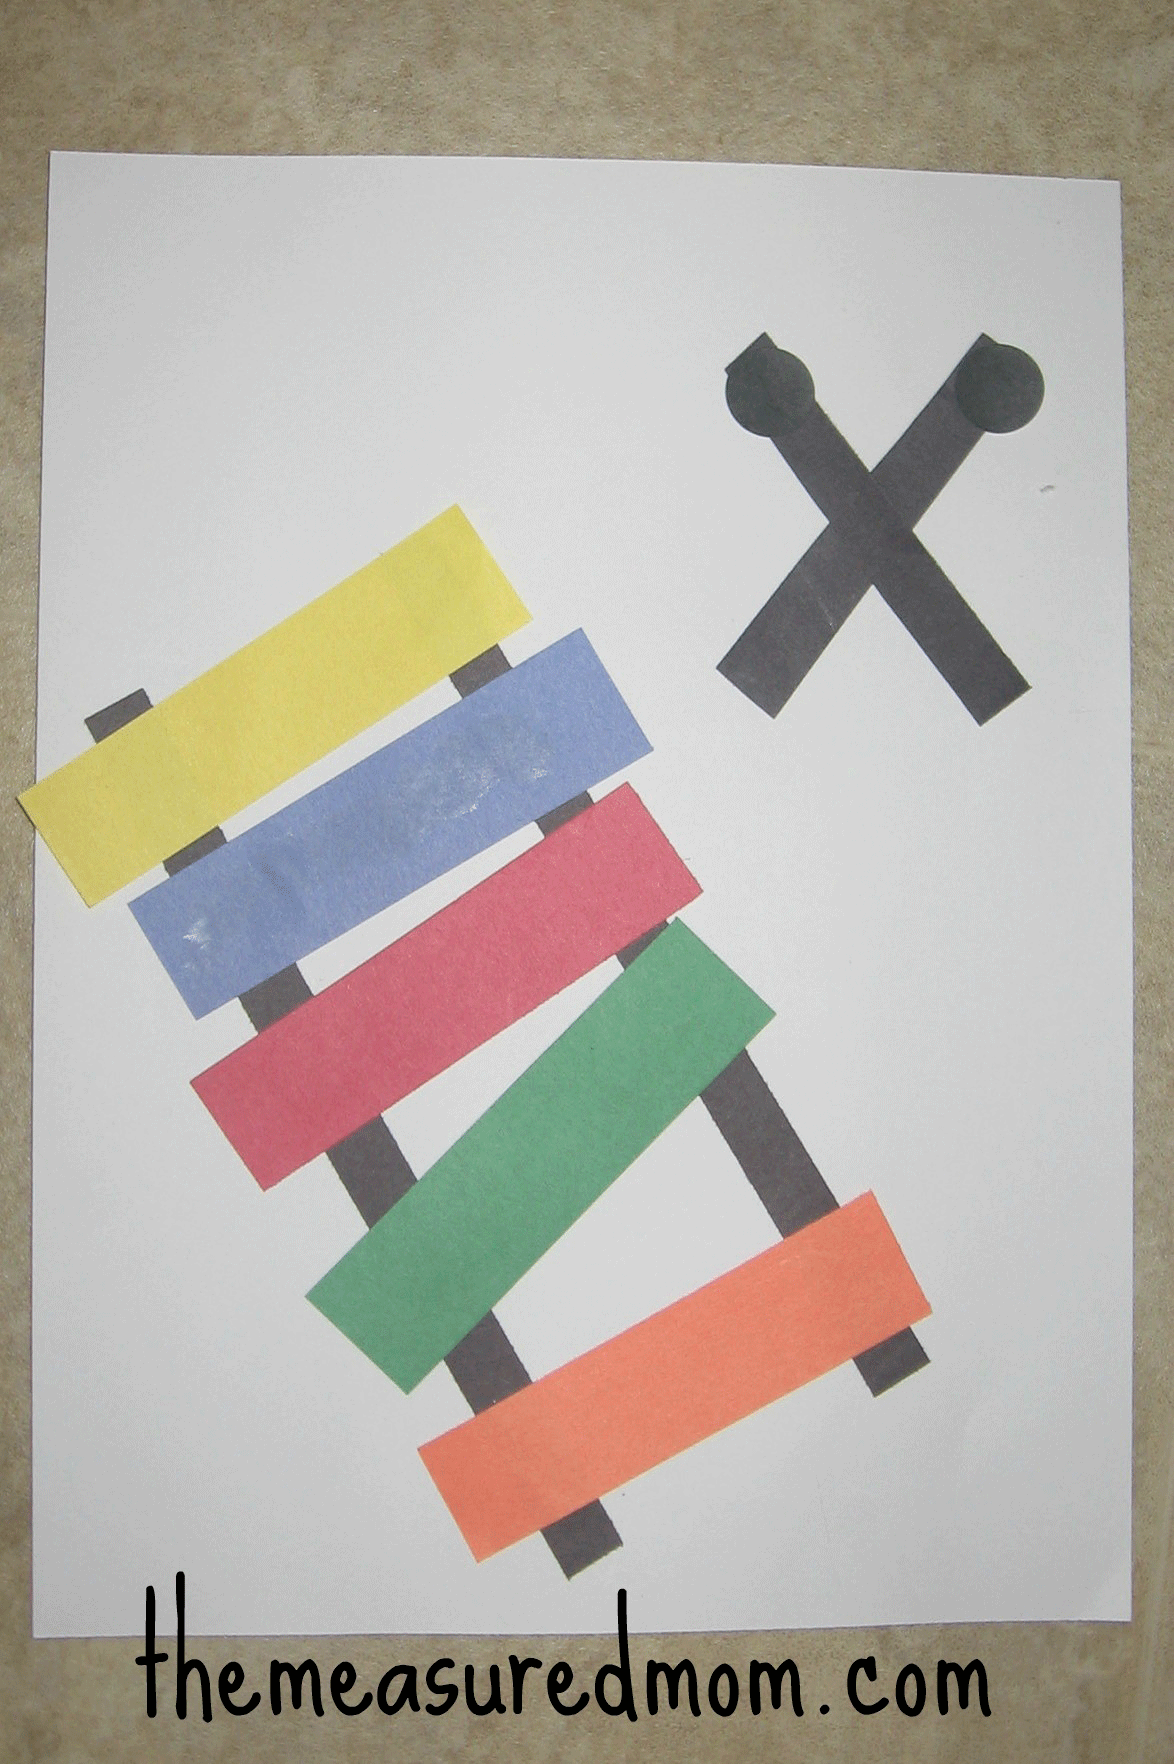 Letter X Craft- X Is For Xylophone Preschool Craft